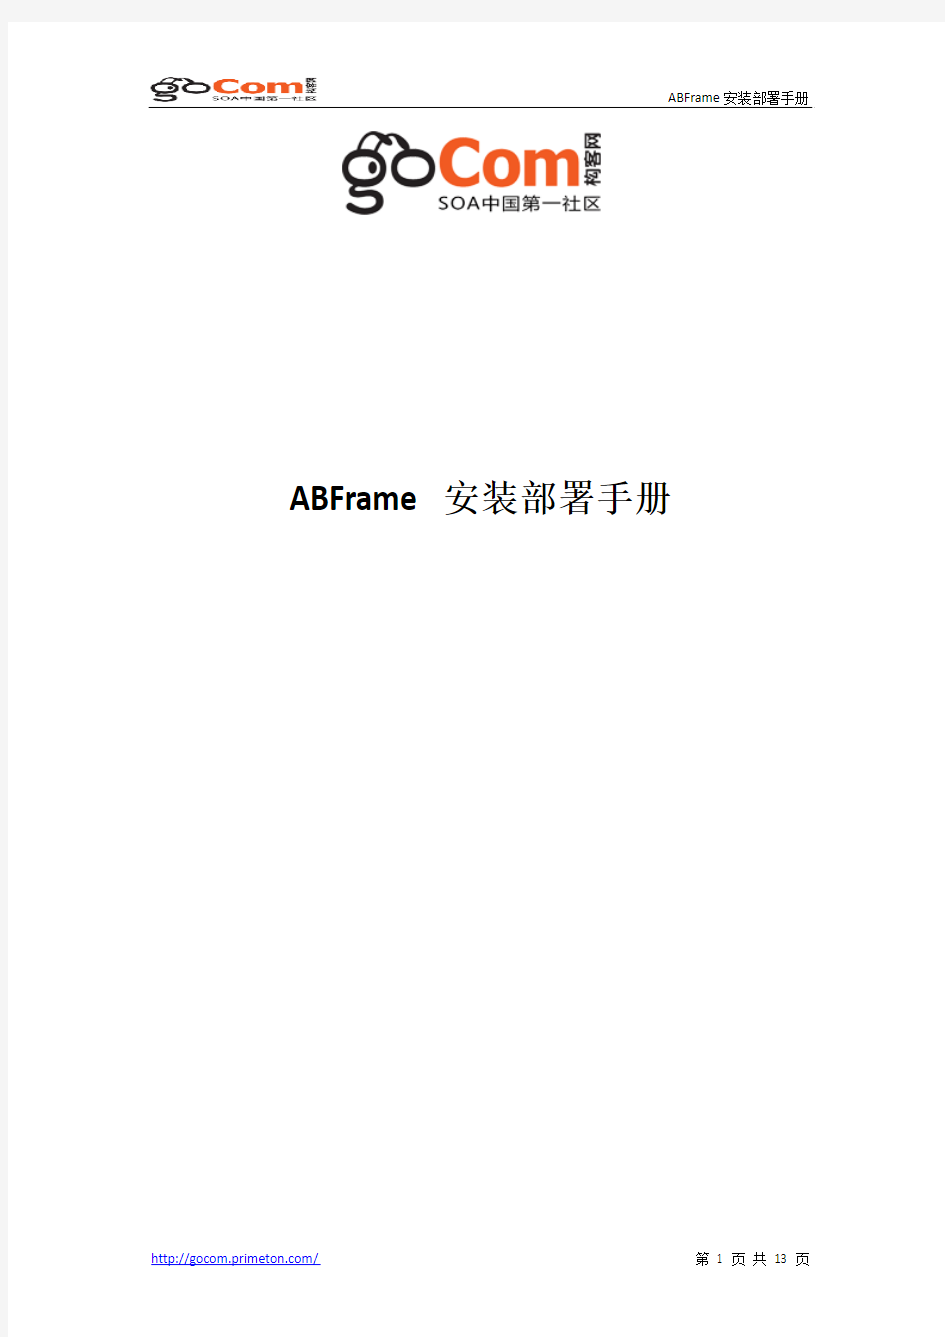 ABFRAME 部署文档